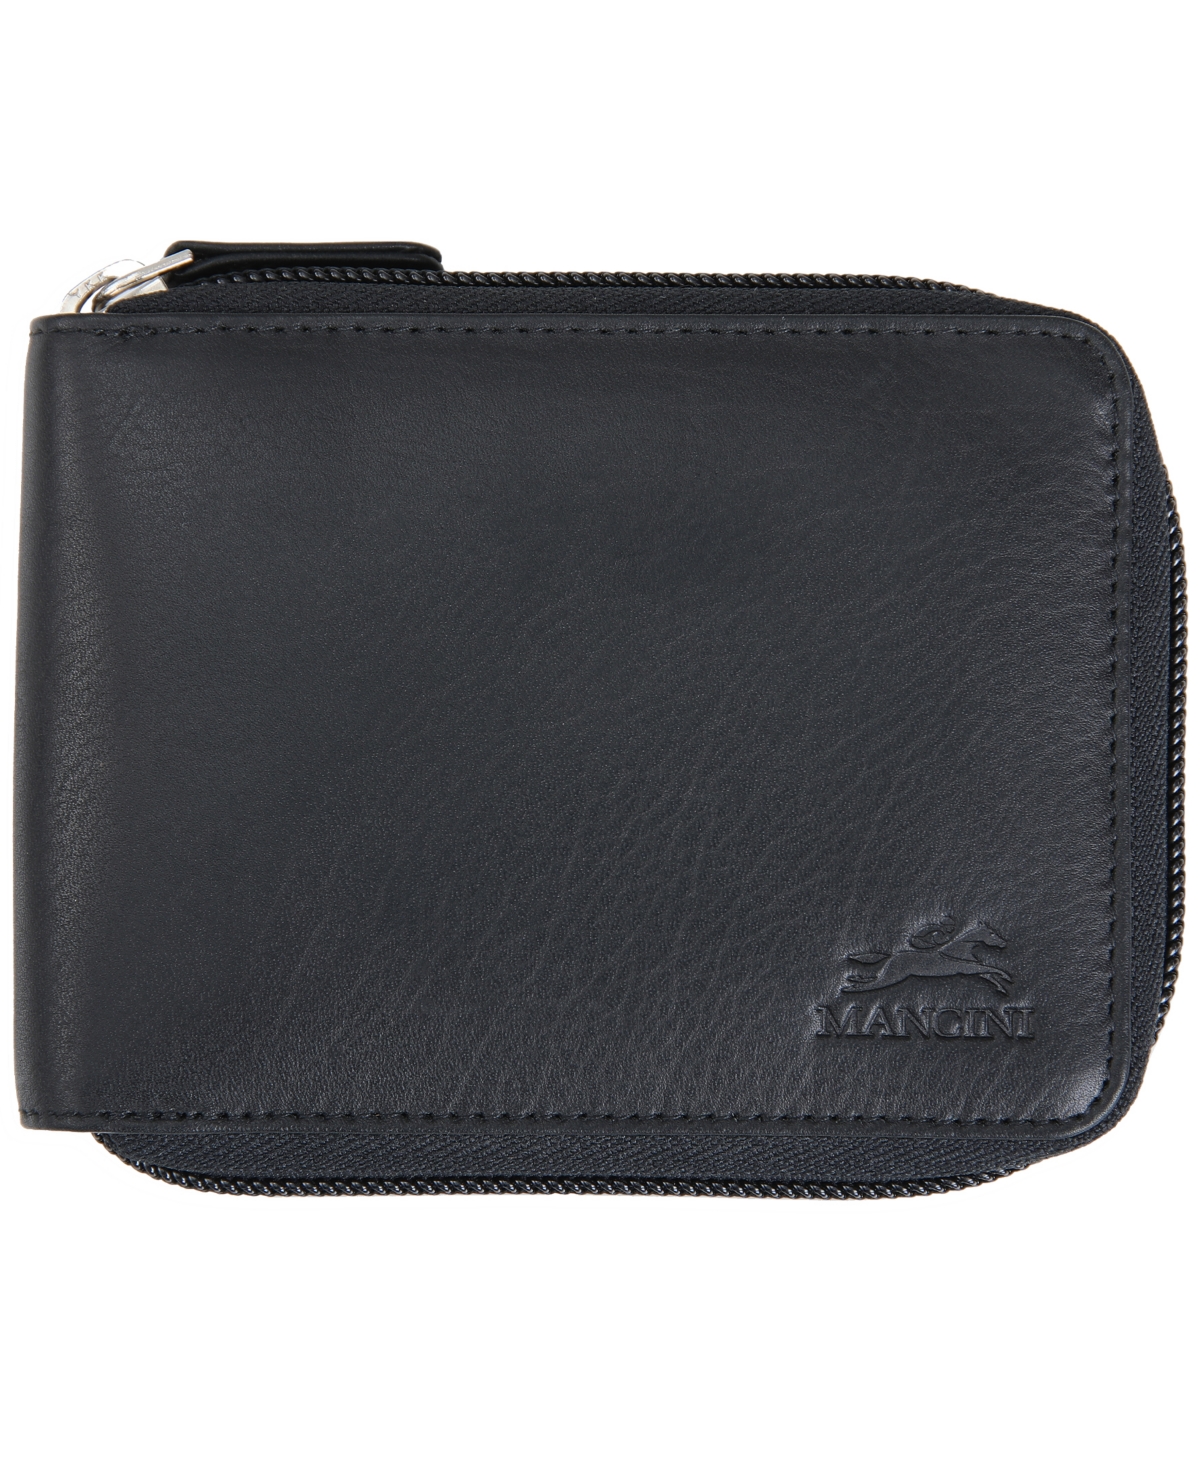 Men's Monterrey Collection Zippered Bifold Wallet with Removable Pass Case - Black